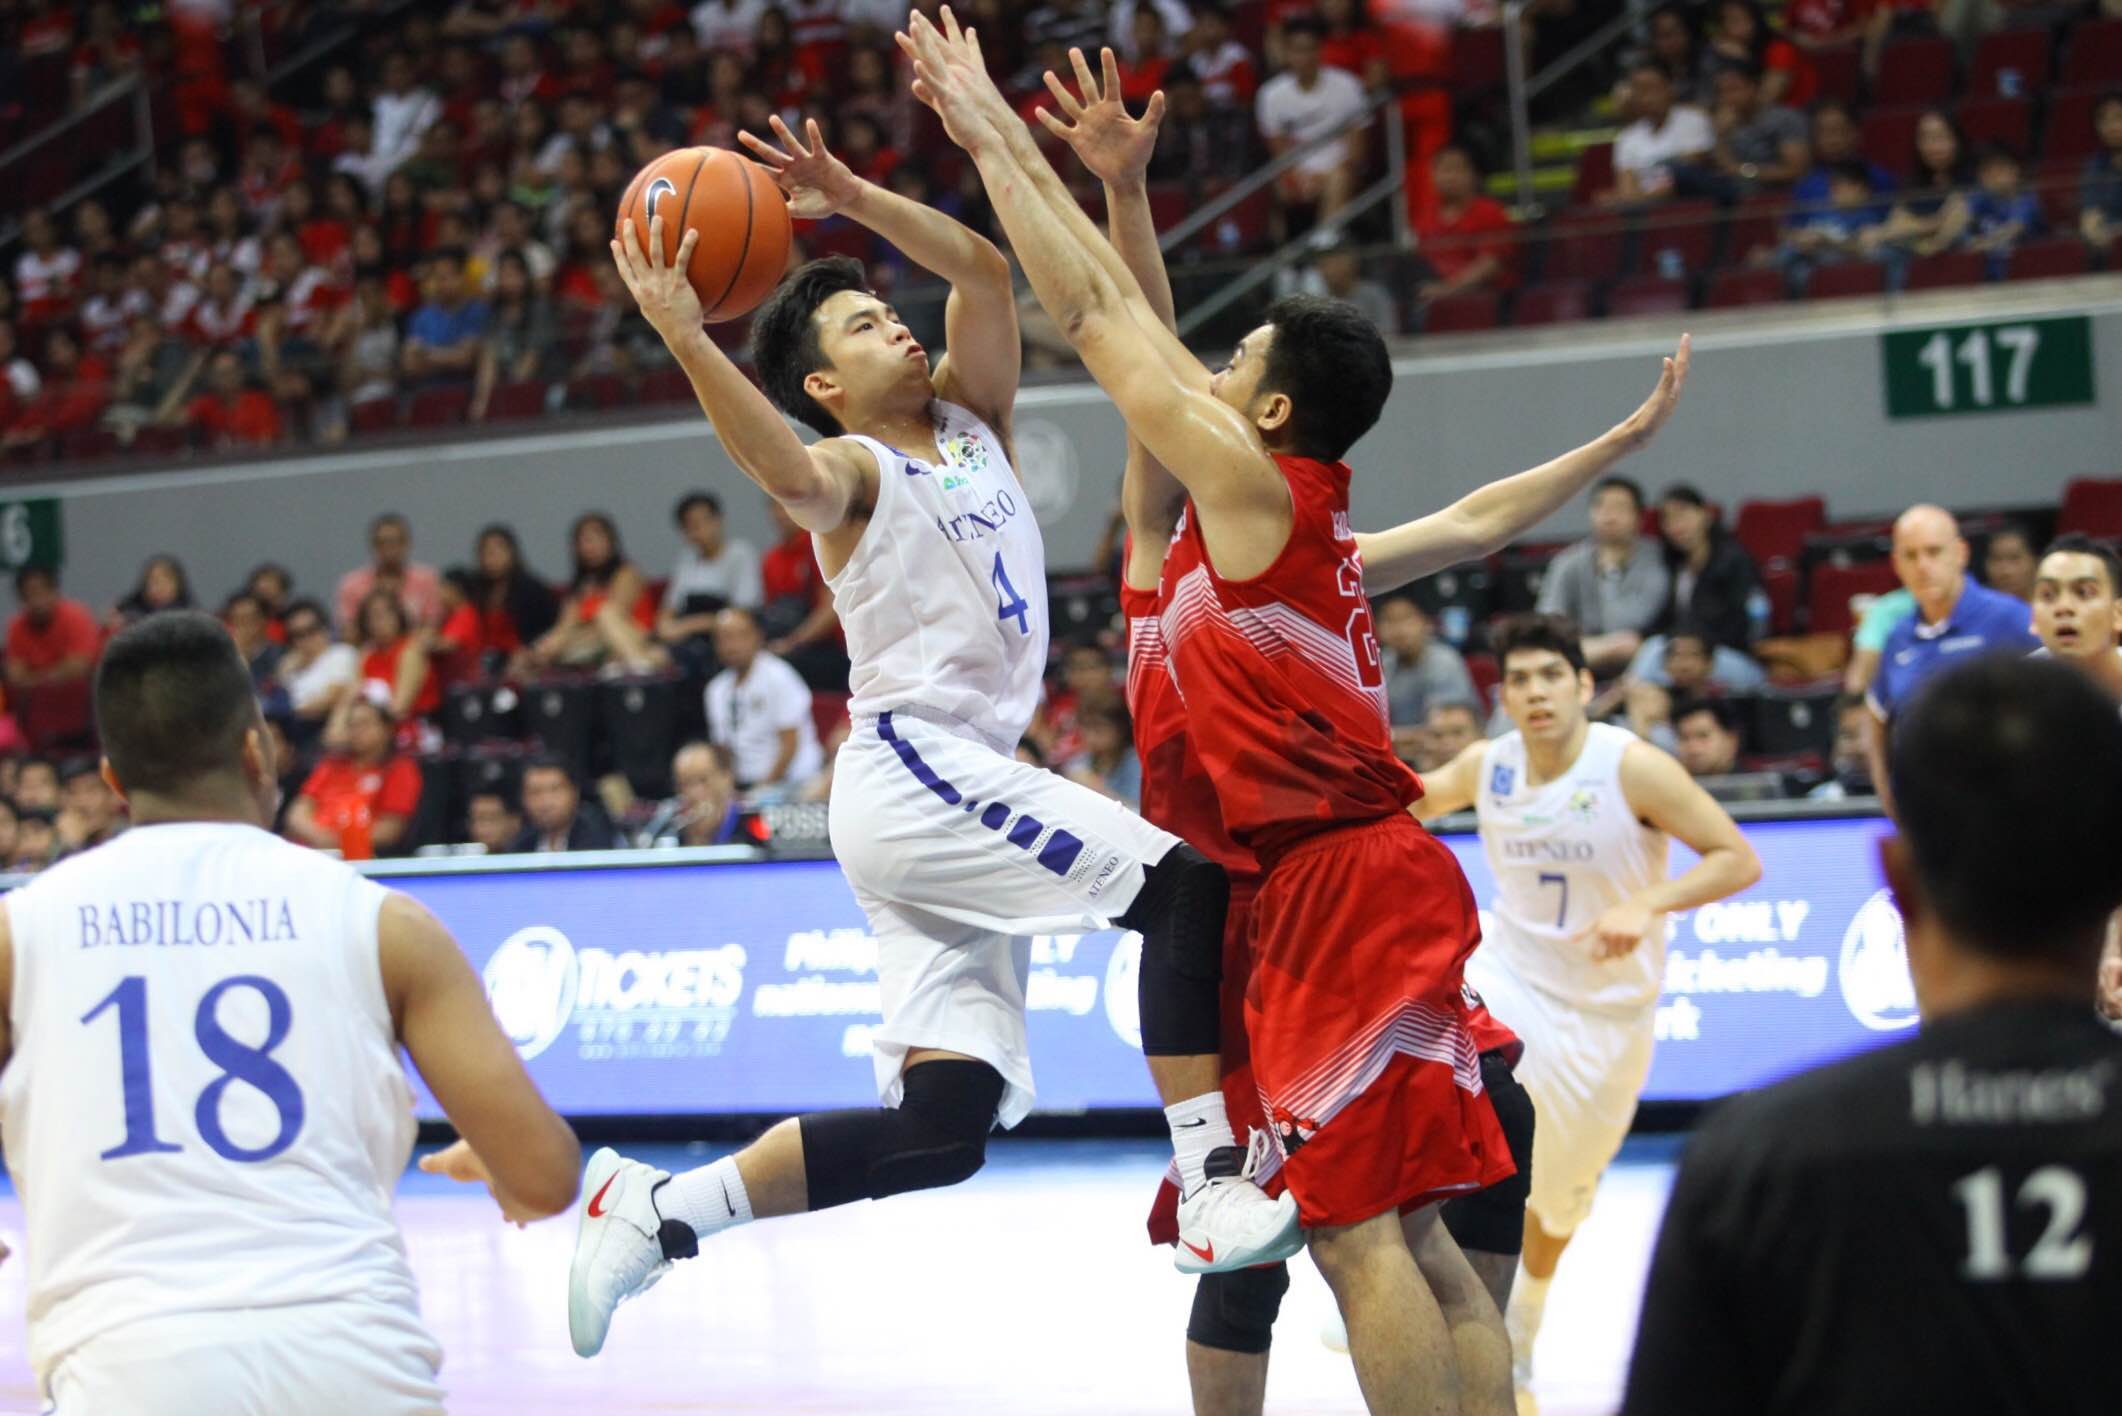 Ateneo survives slow start to beat UE and end skid